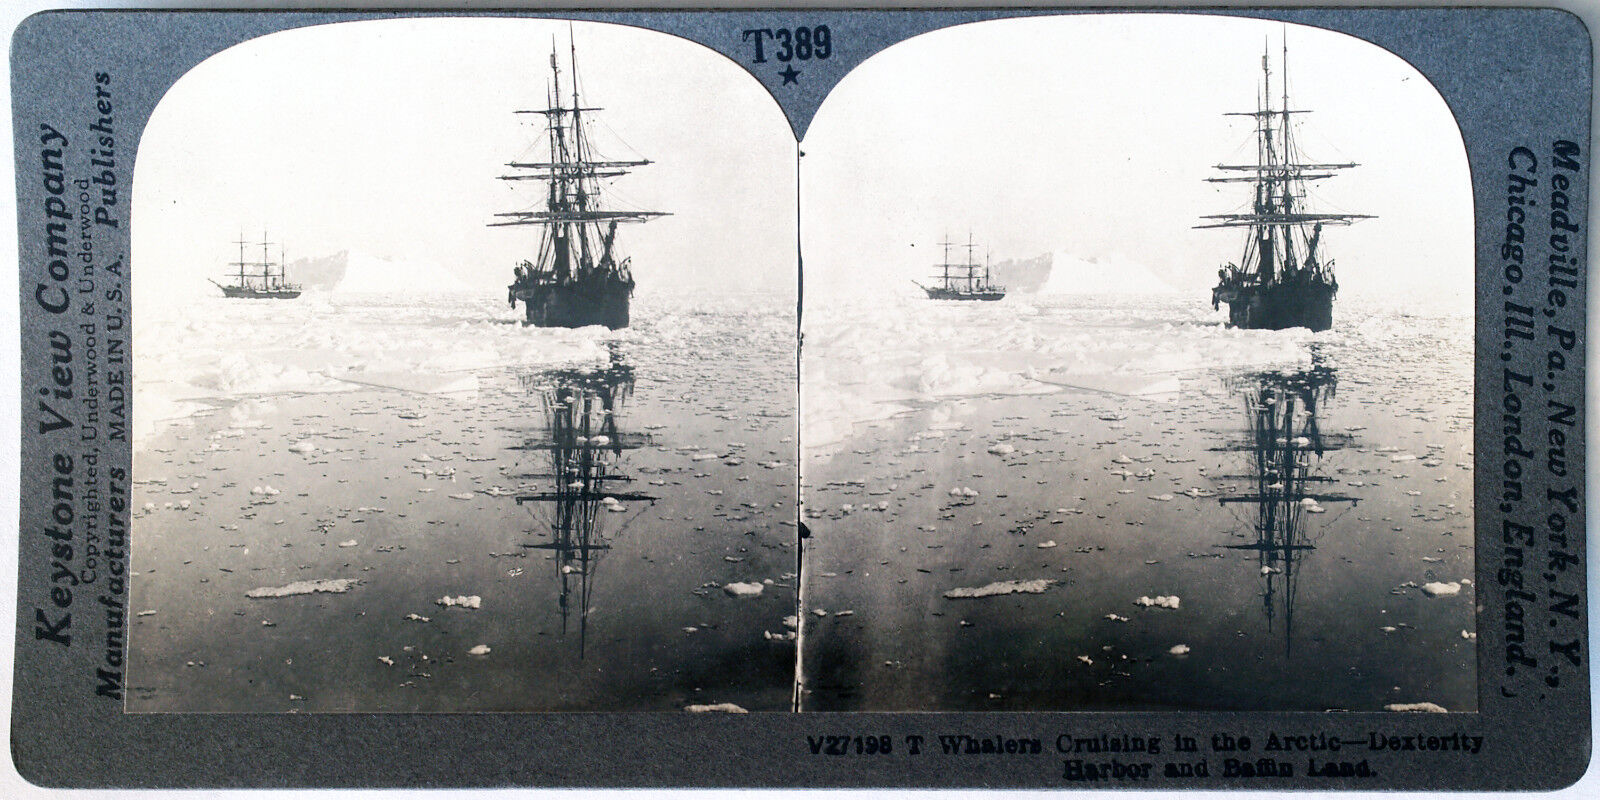 Keystone Stereoview Two Whaling Ships in the Arctic from 1930’s T400 Set #T389